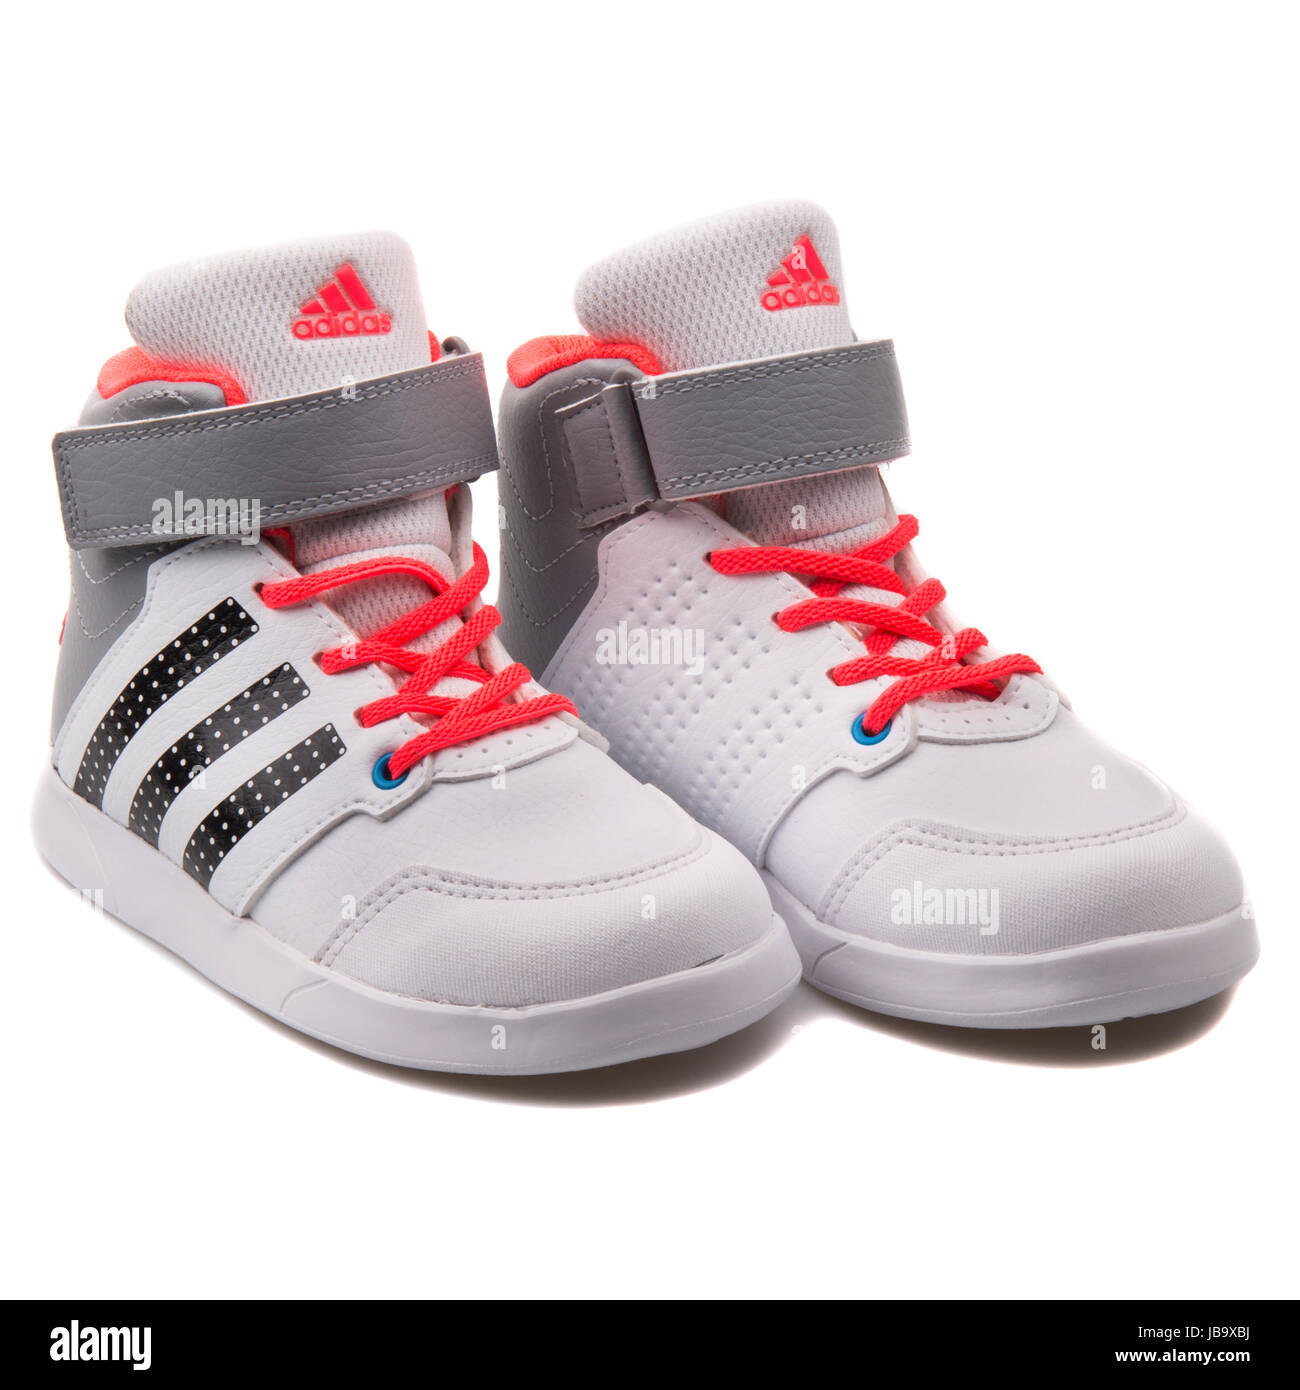 Adidas Jan BS 2 Mid 1 White and Grey 